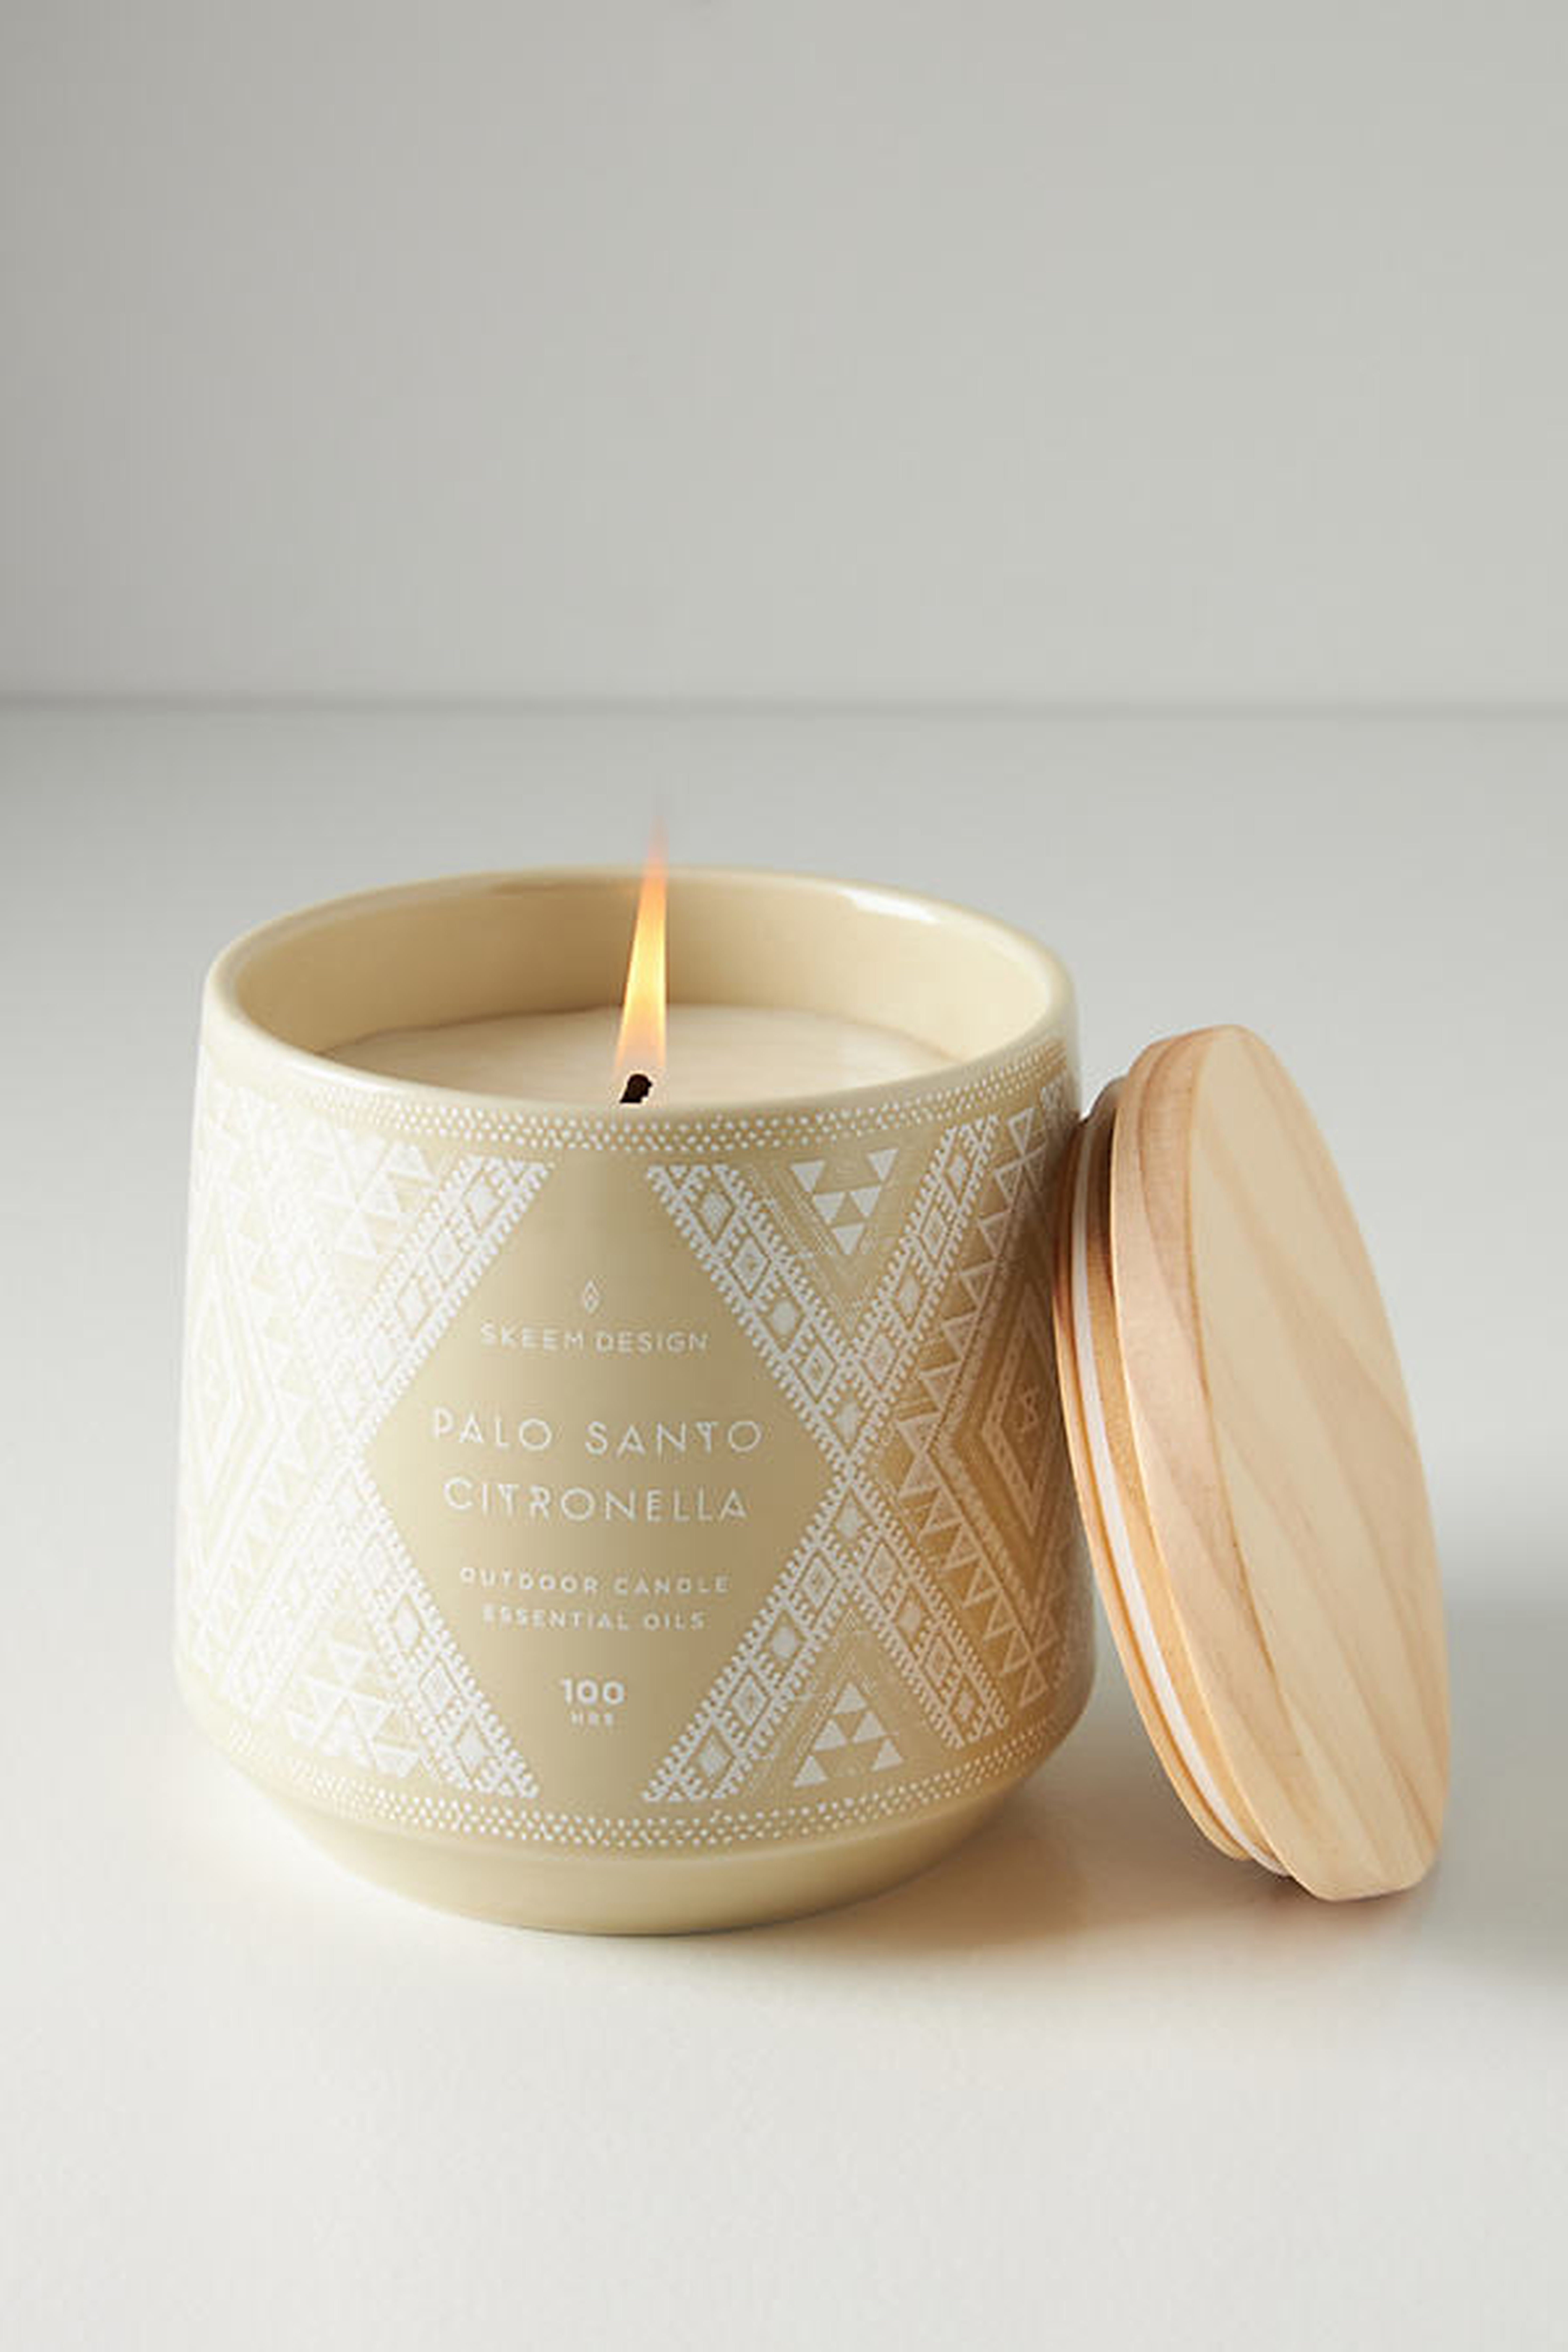 Palo Santo Citronella Candle By Skeem in Beige - Anthropologie